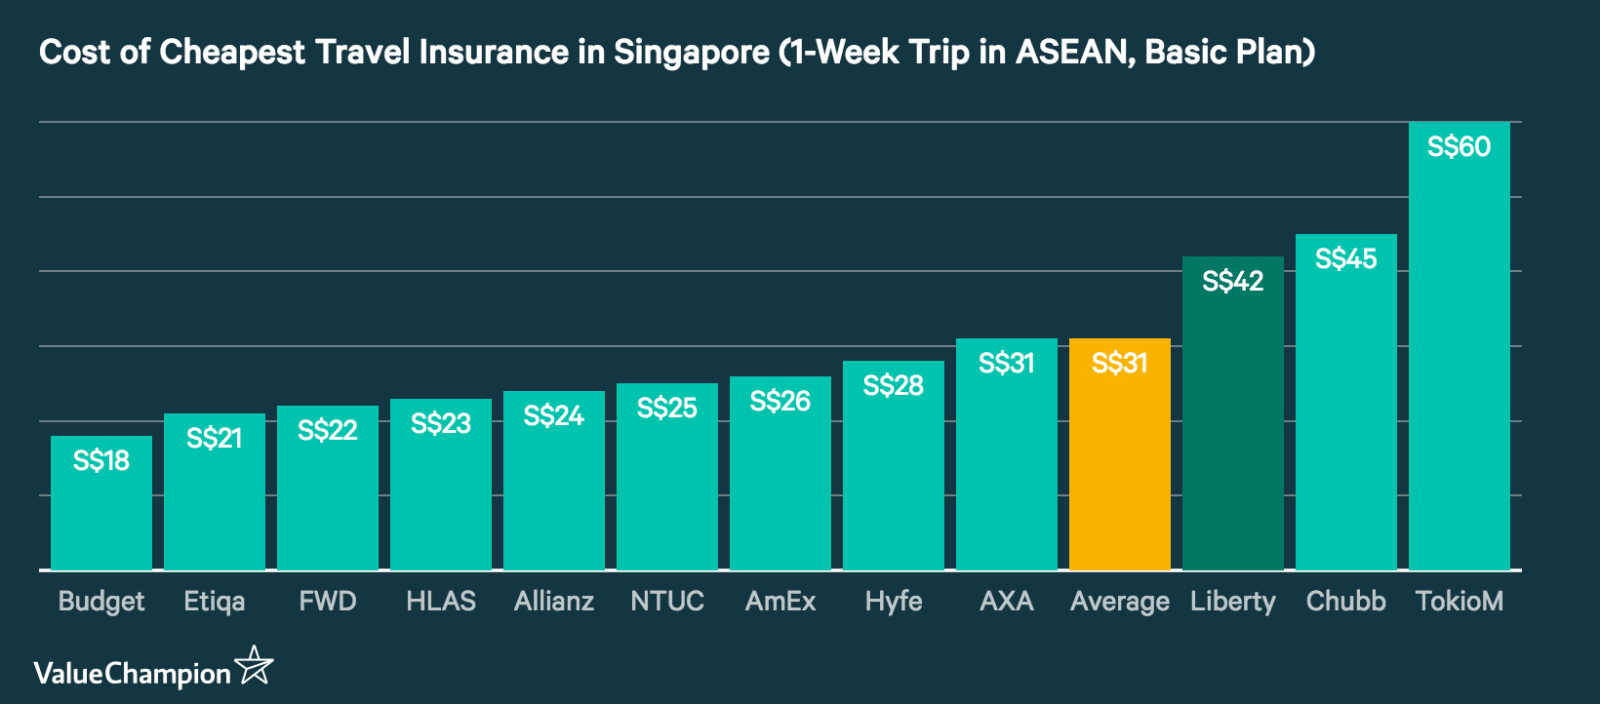 This graph shows the cost of the cheapest travel insurance premiums for a 1-week trip to the ASEAN region